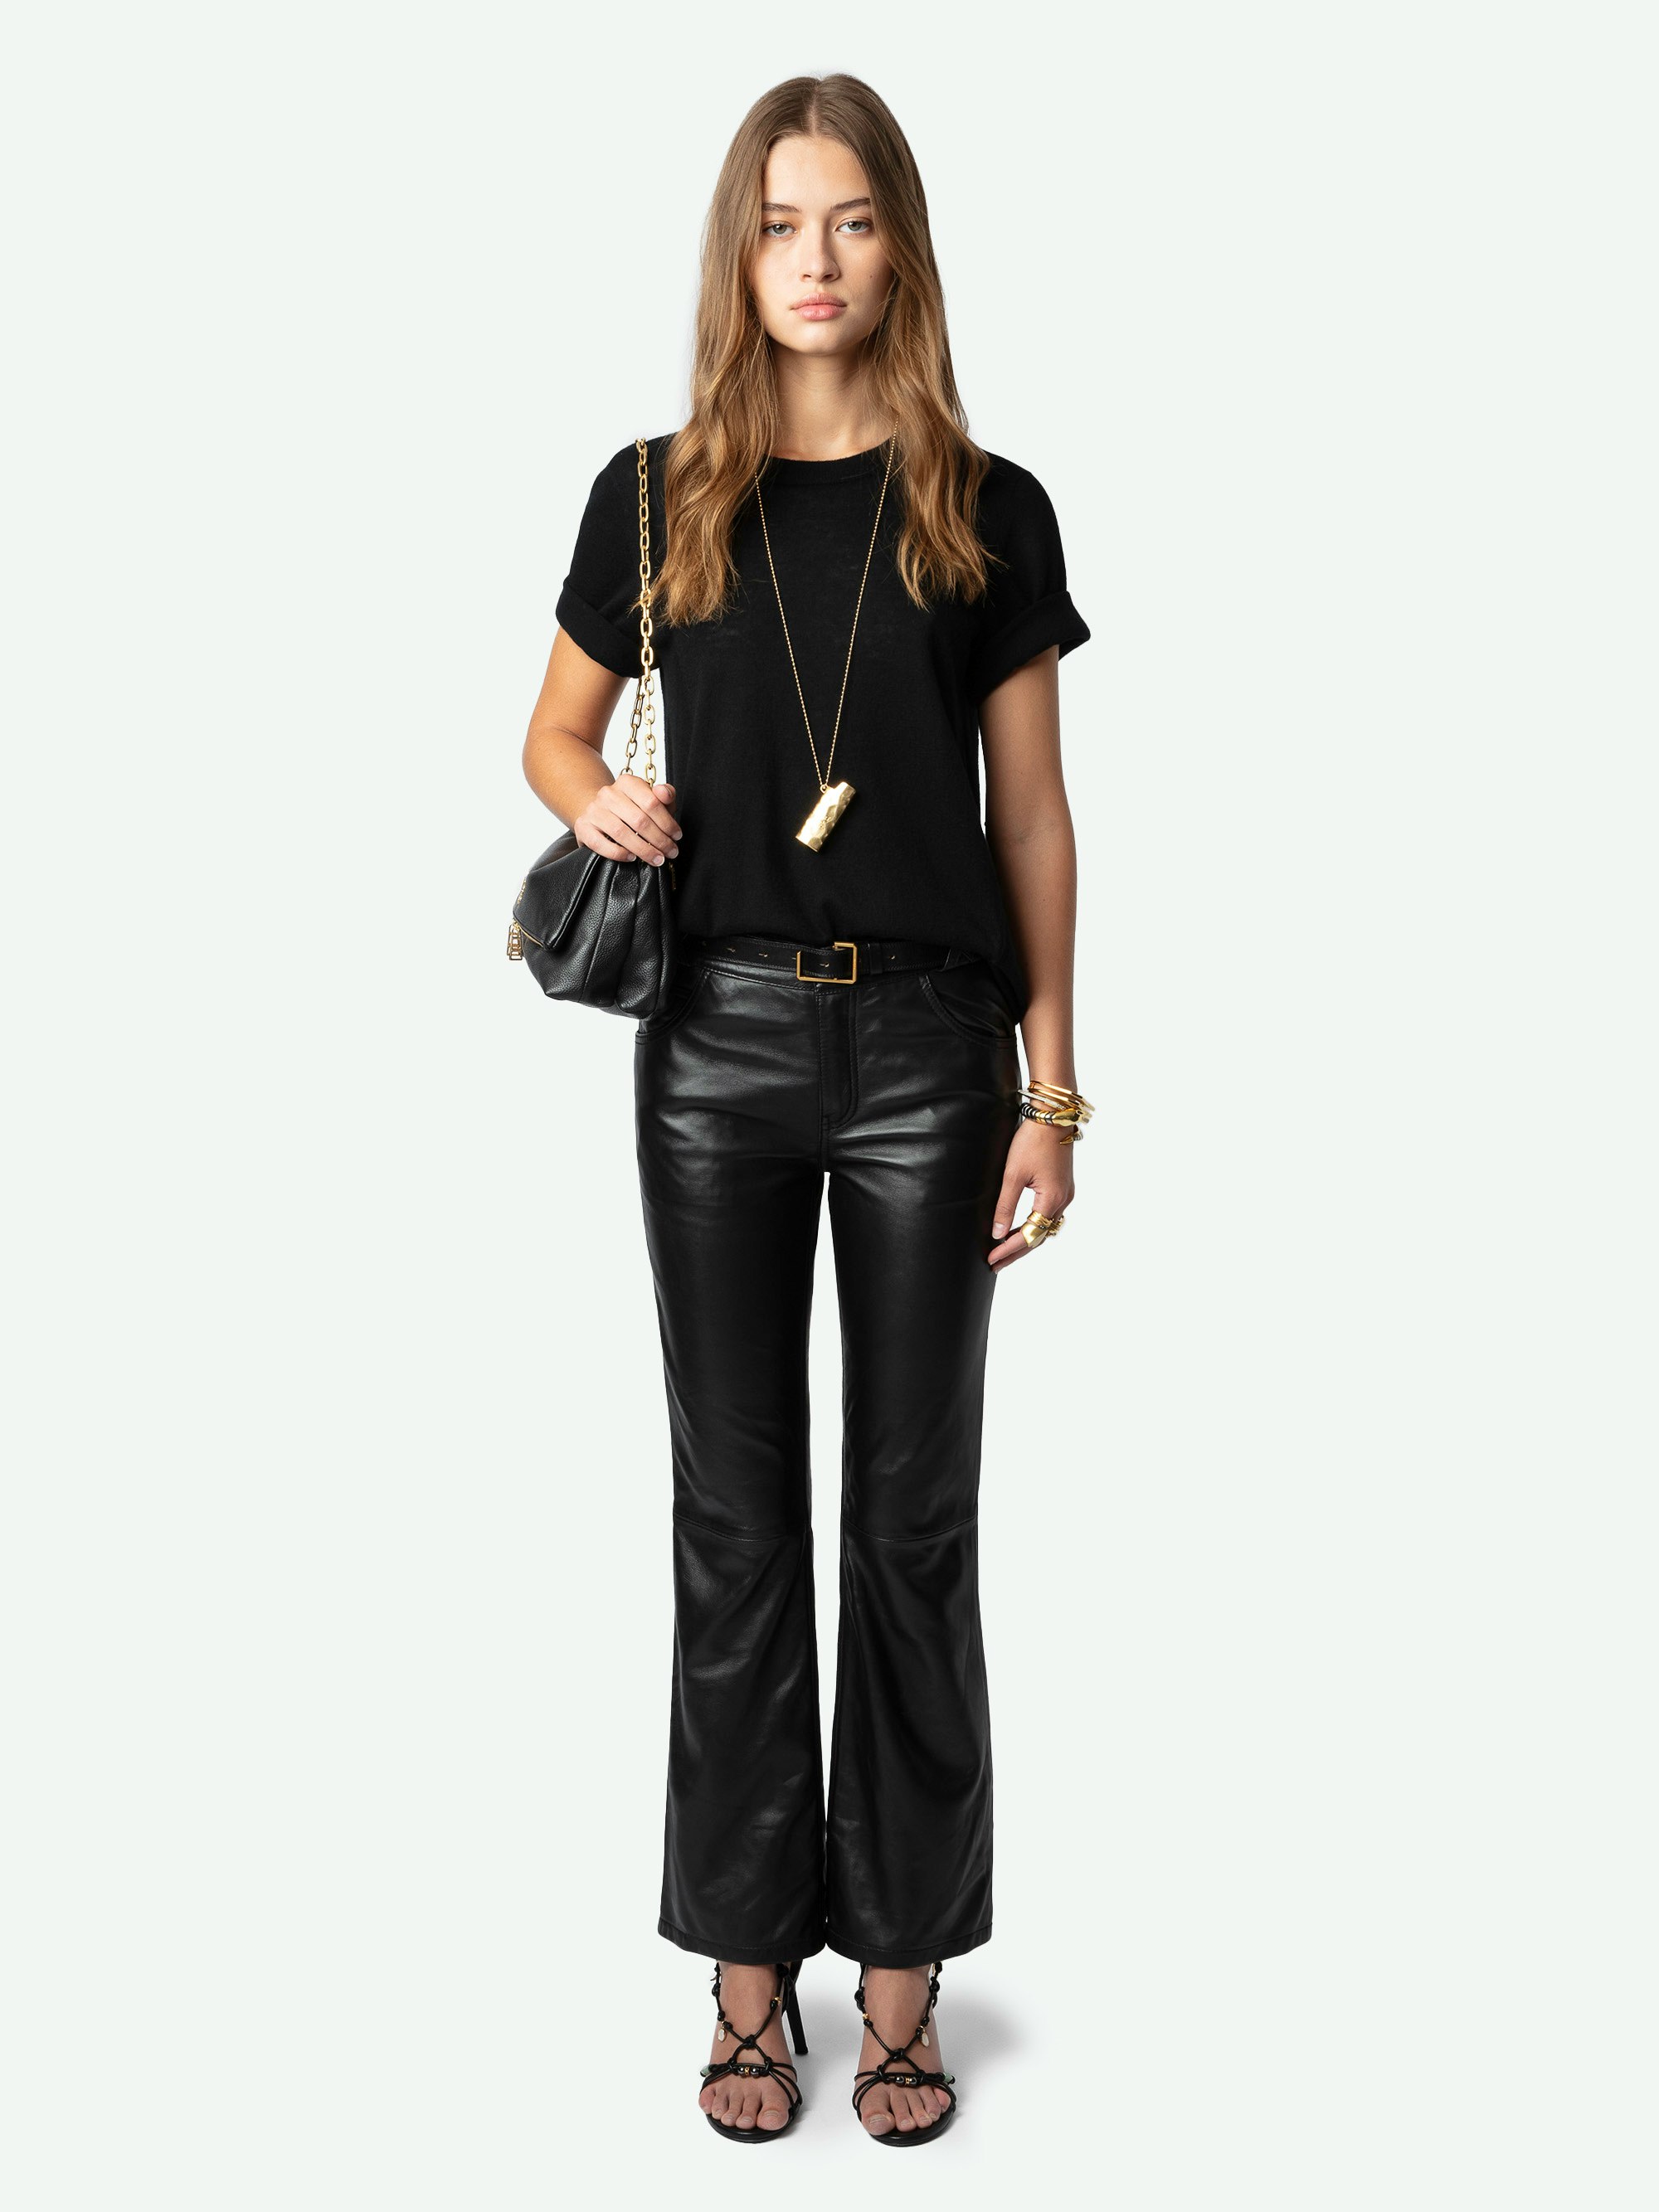 Push Leather Trousers - Flared trousers in smooth black leather with pockets and braided details on the belt loops.